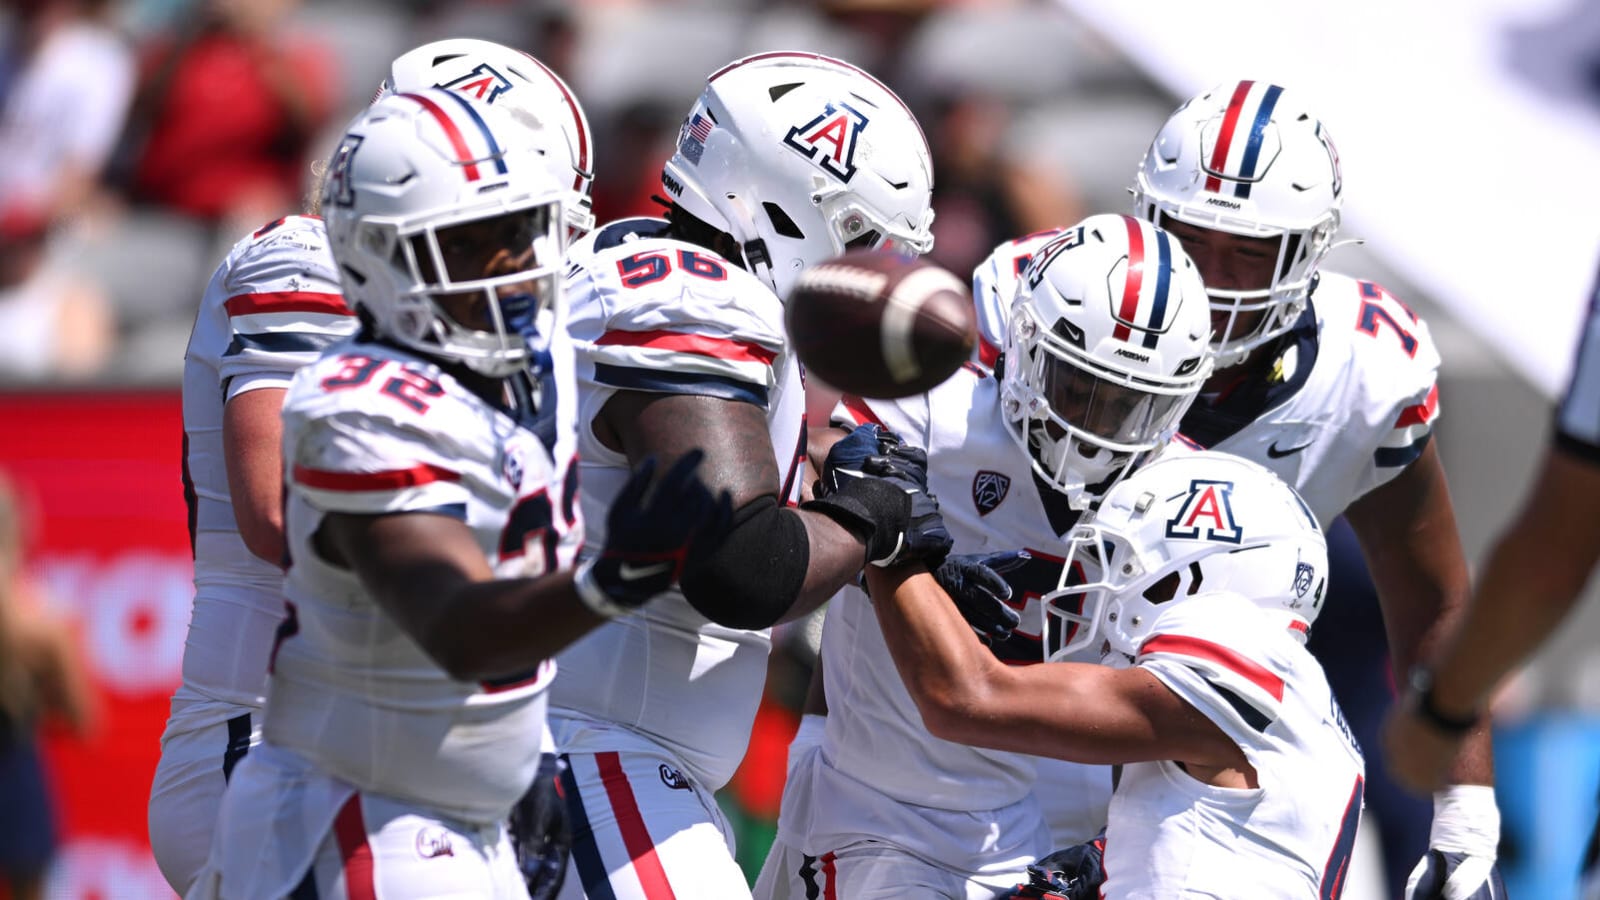 Watch: Arizona has punt blocked by own team in end zone